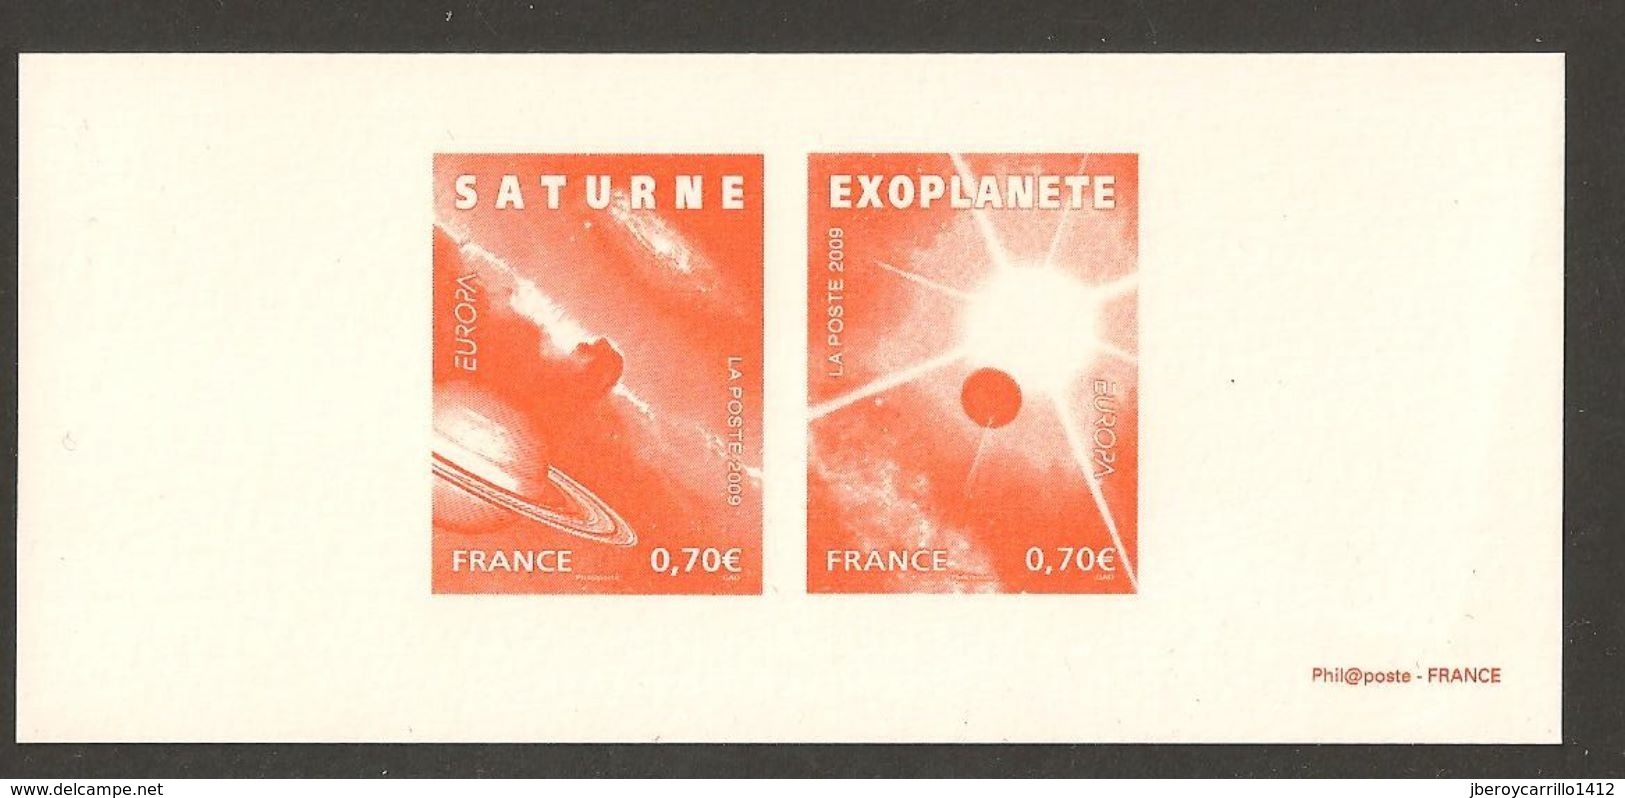 FRANCIA / FRANCE /FRANKREICH  - EUROPA 2009 - TEMA "ASTRONOMIA" - GRAVURE Or PRINT PROOF STAMPS From SOUVENIR SHEET - 2009